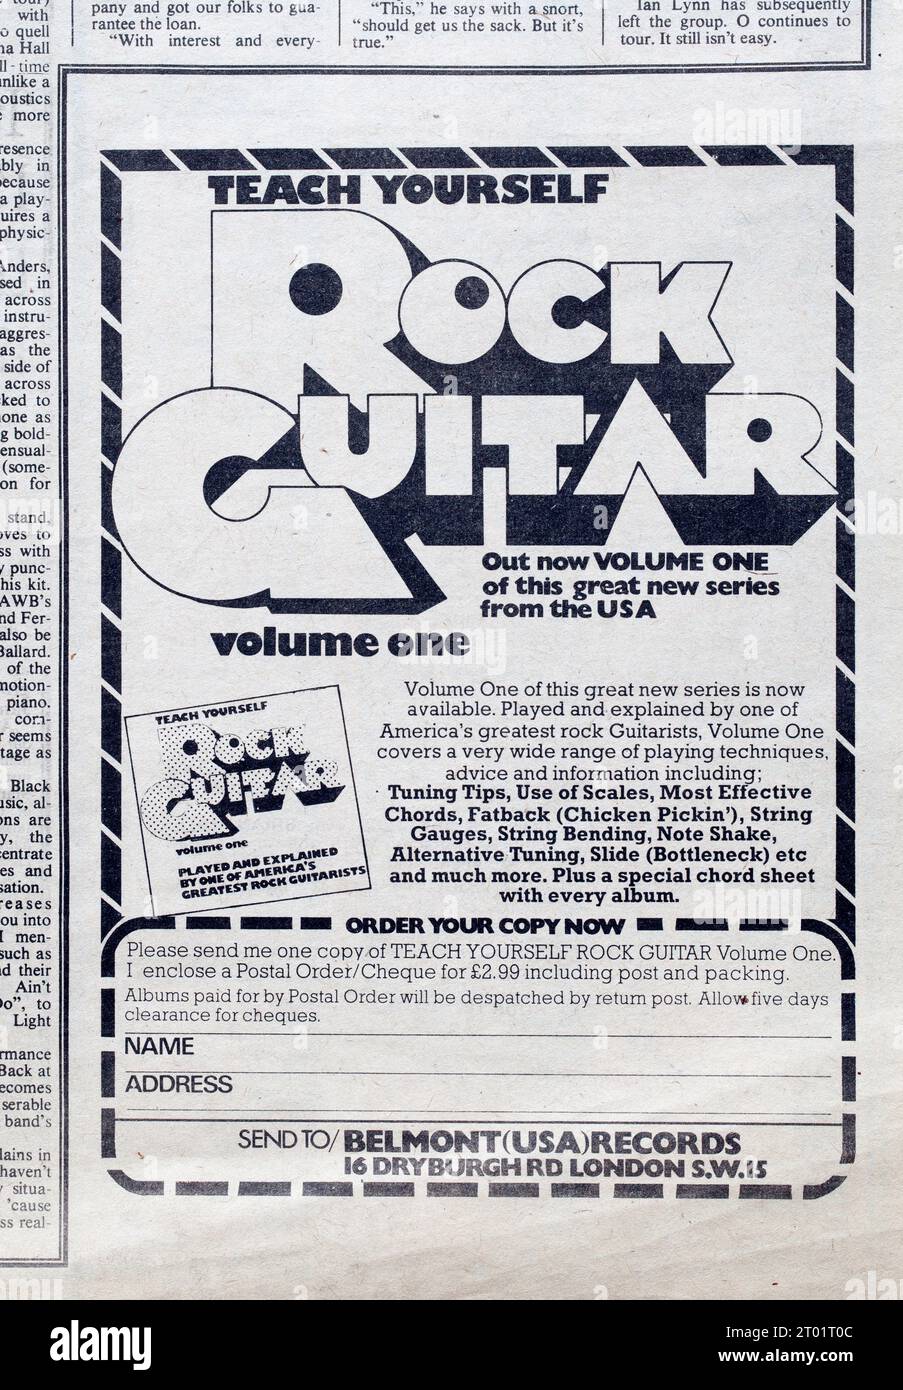 Advert for Teach Yourself Rock Guitar in 1970s issue of NME New Musical Express Music Paper Stock Photo